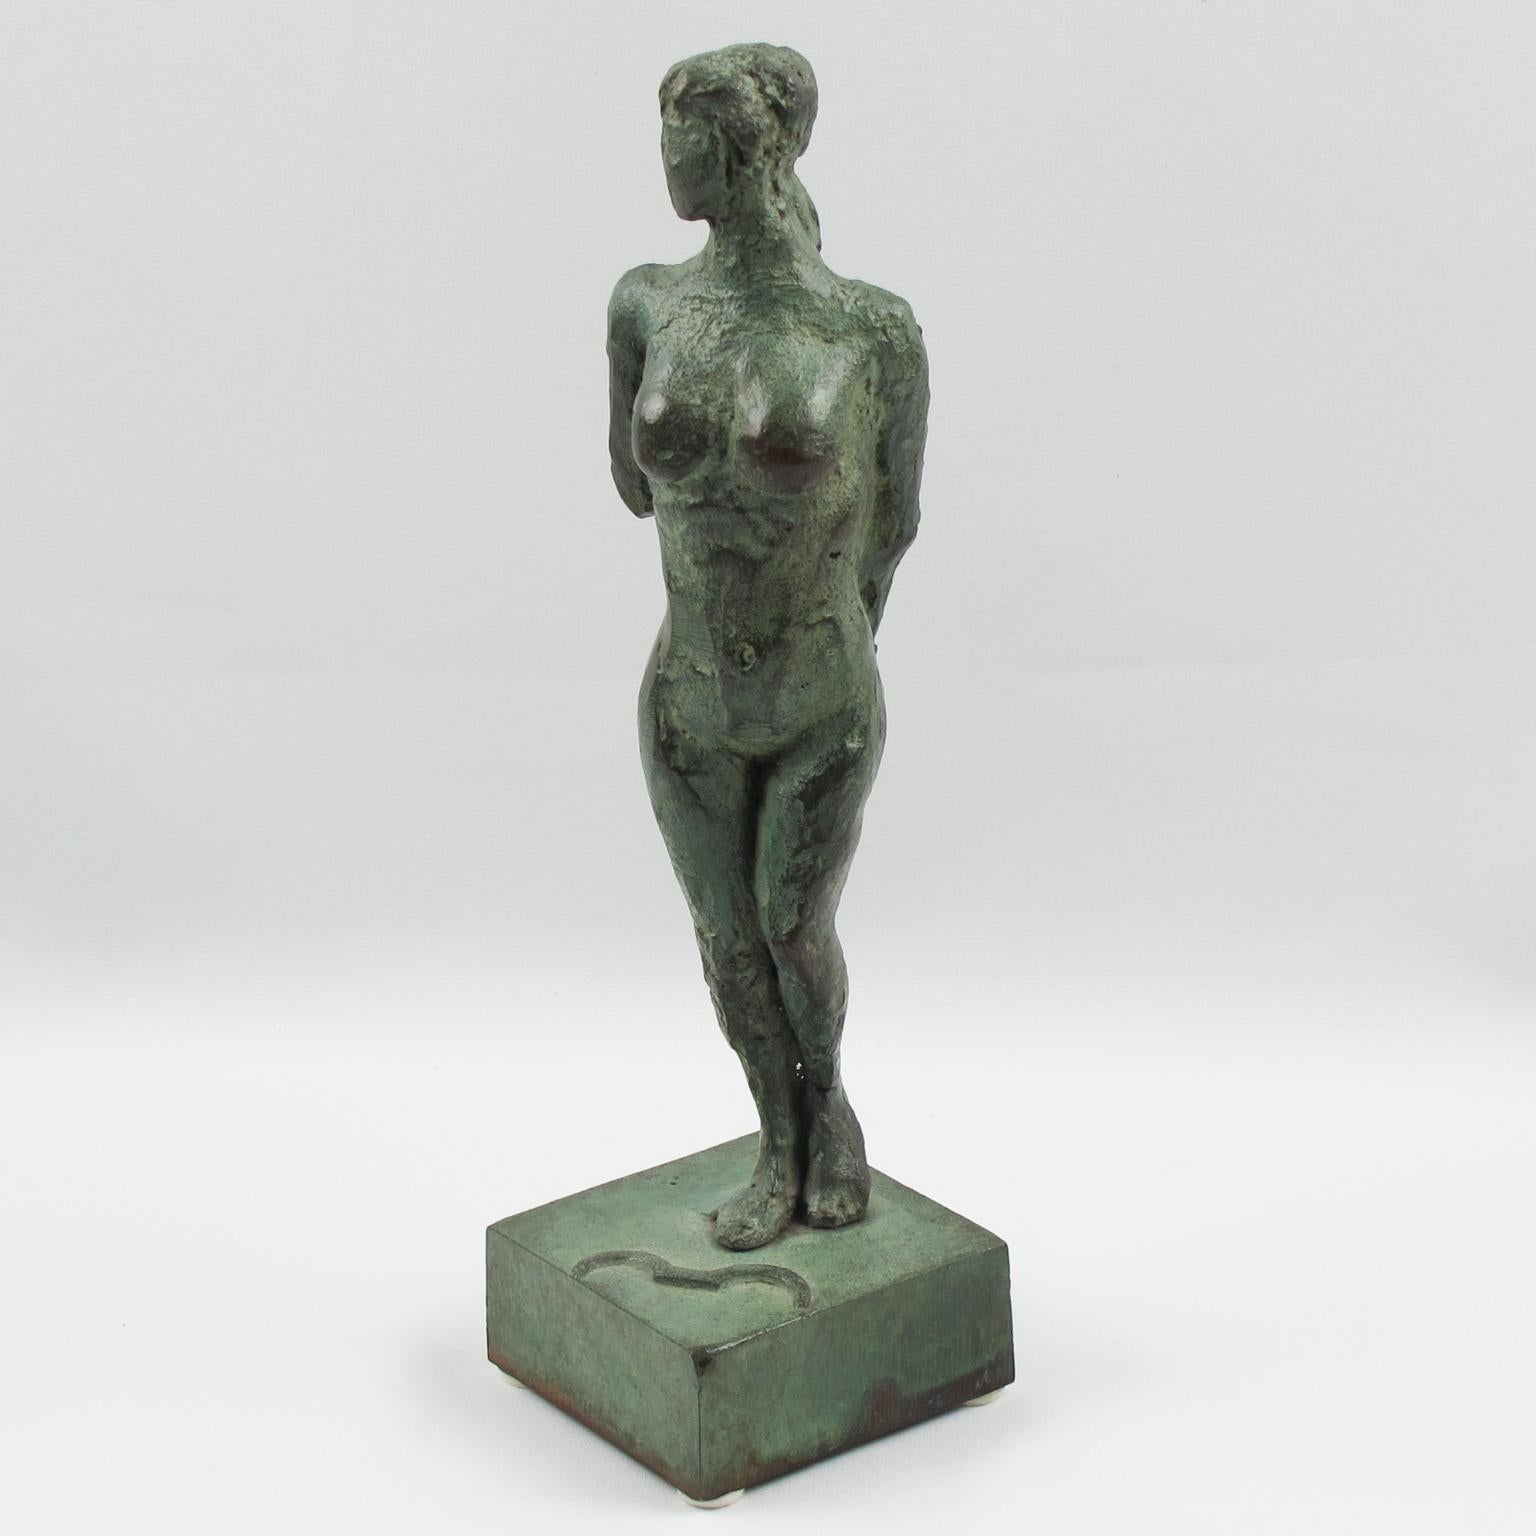 French Art Deco Bronze Sculpture Artemis, Diana the Huntress, France 1930s For Sale